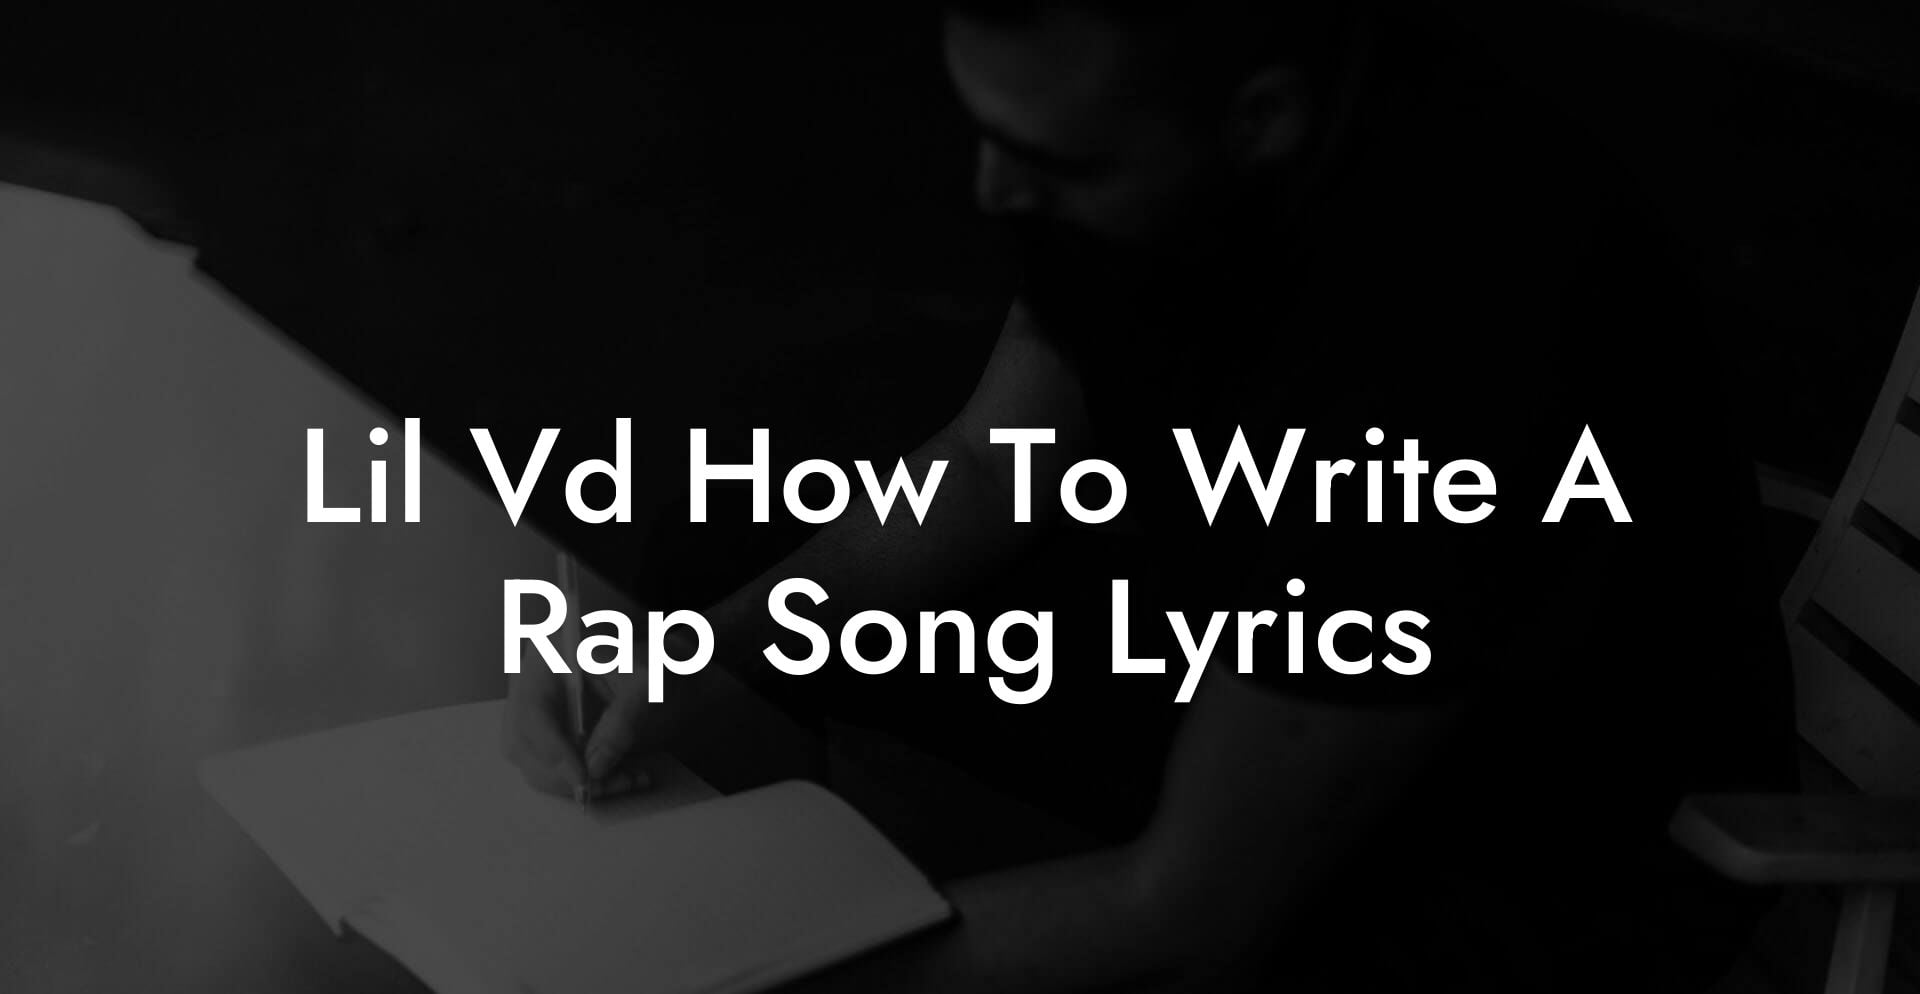 lil vd how to write a rap song lyrics lyric assistant